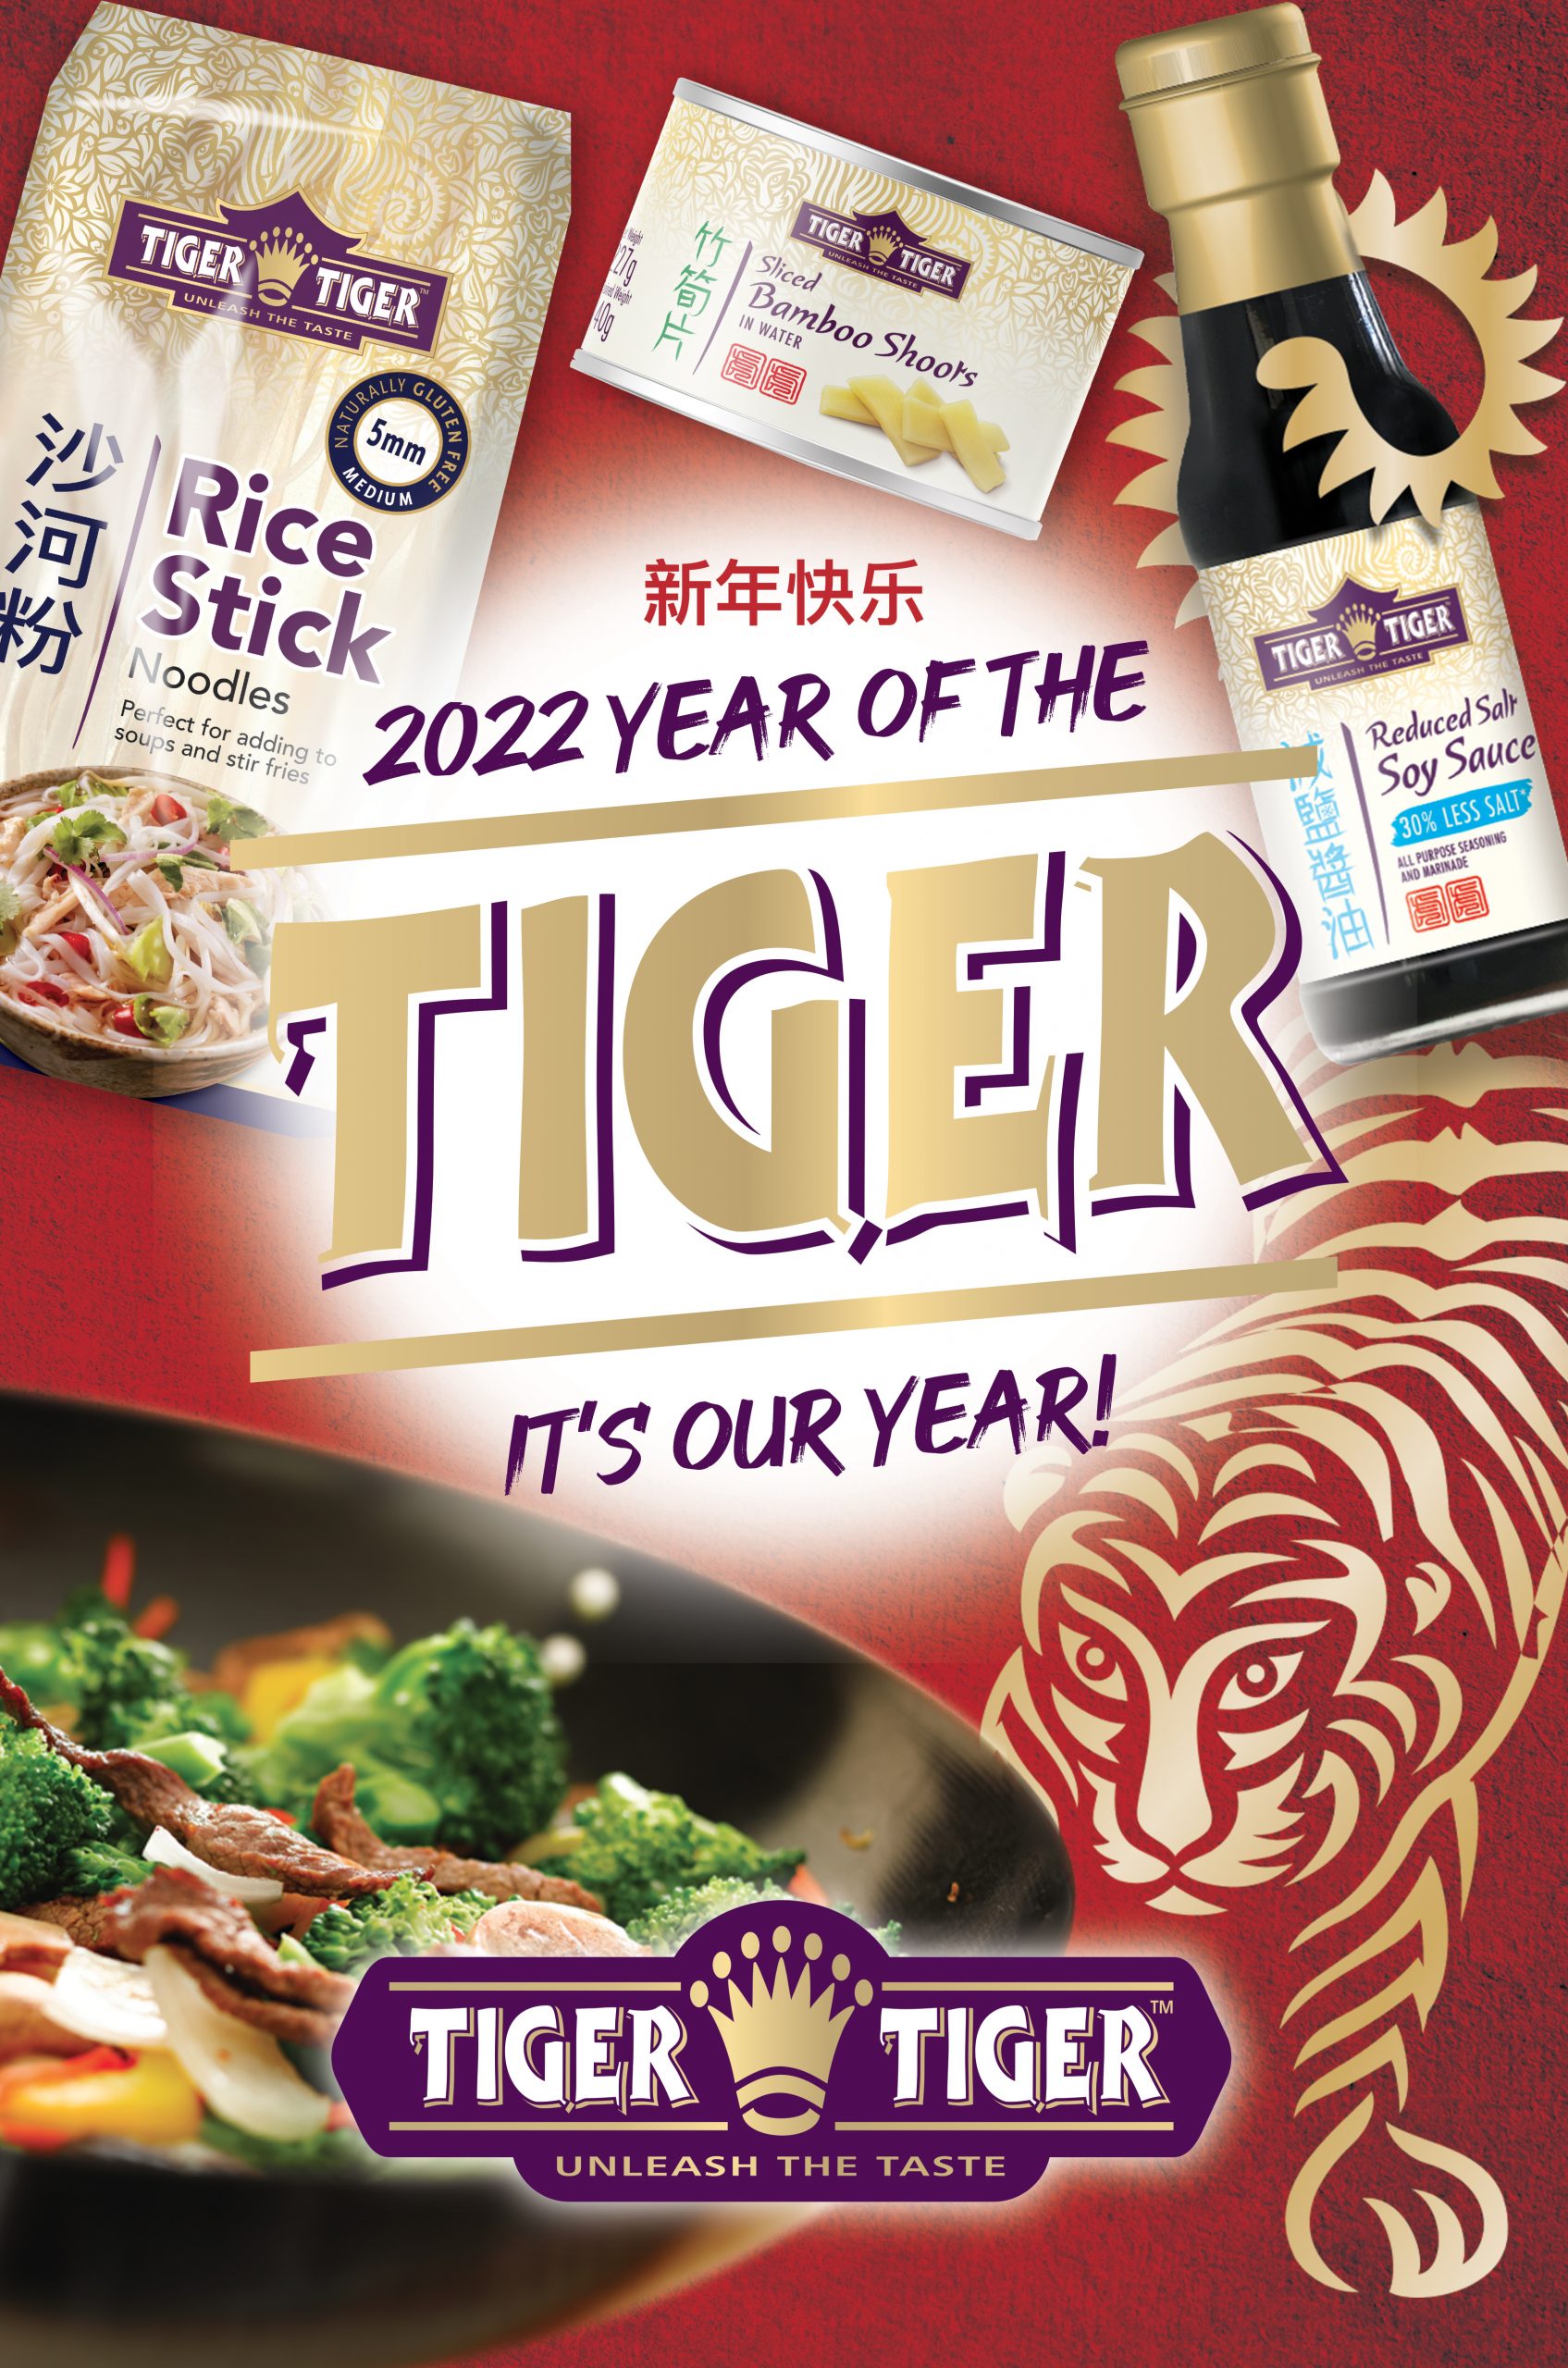 Tiger Tiger unveils Chinese New Year ad campaign